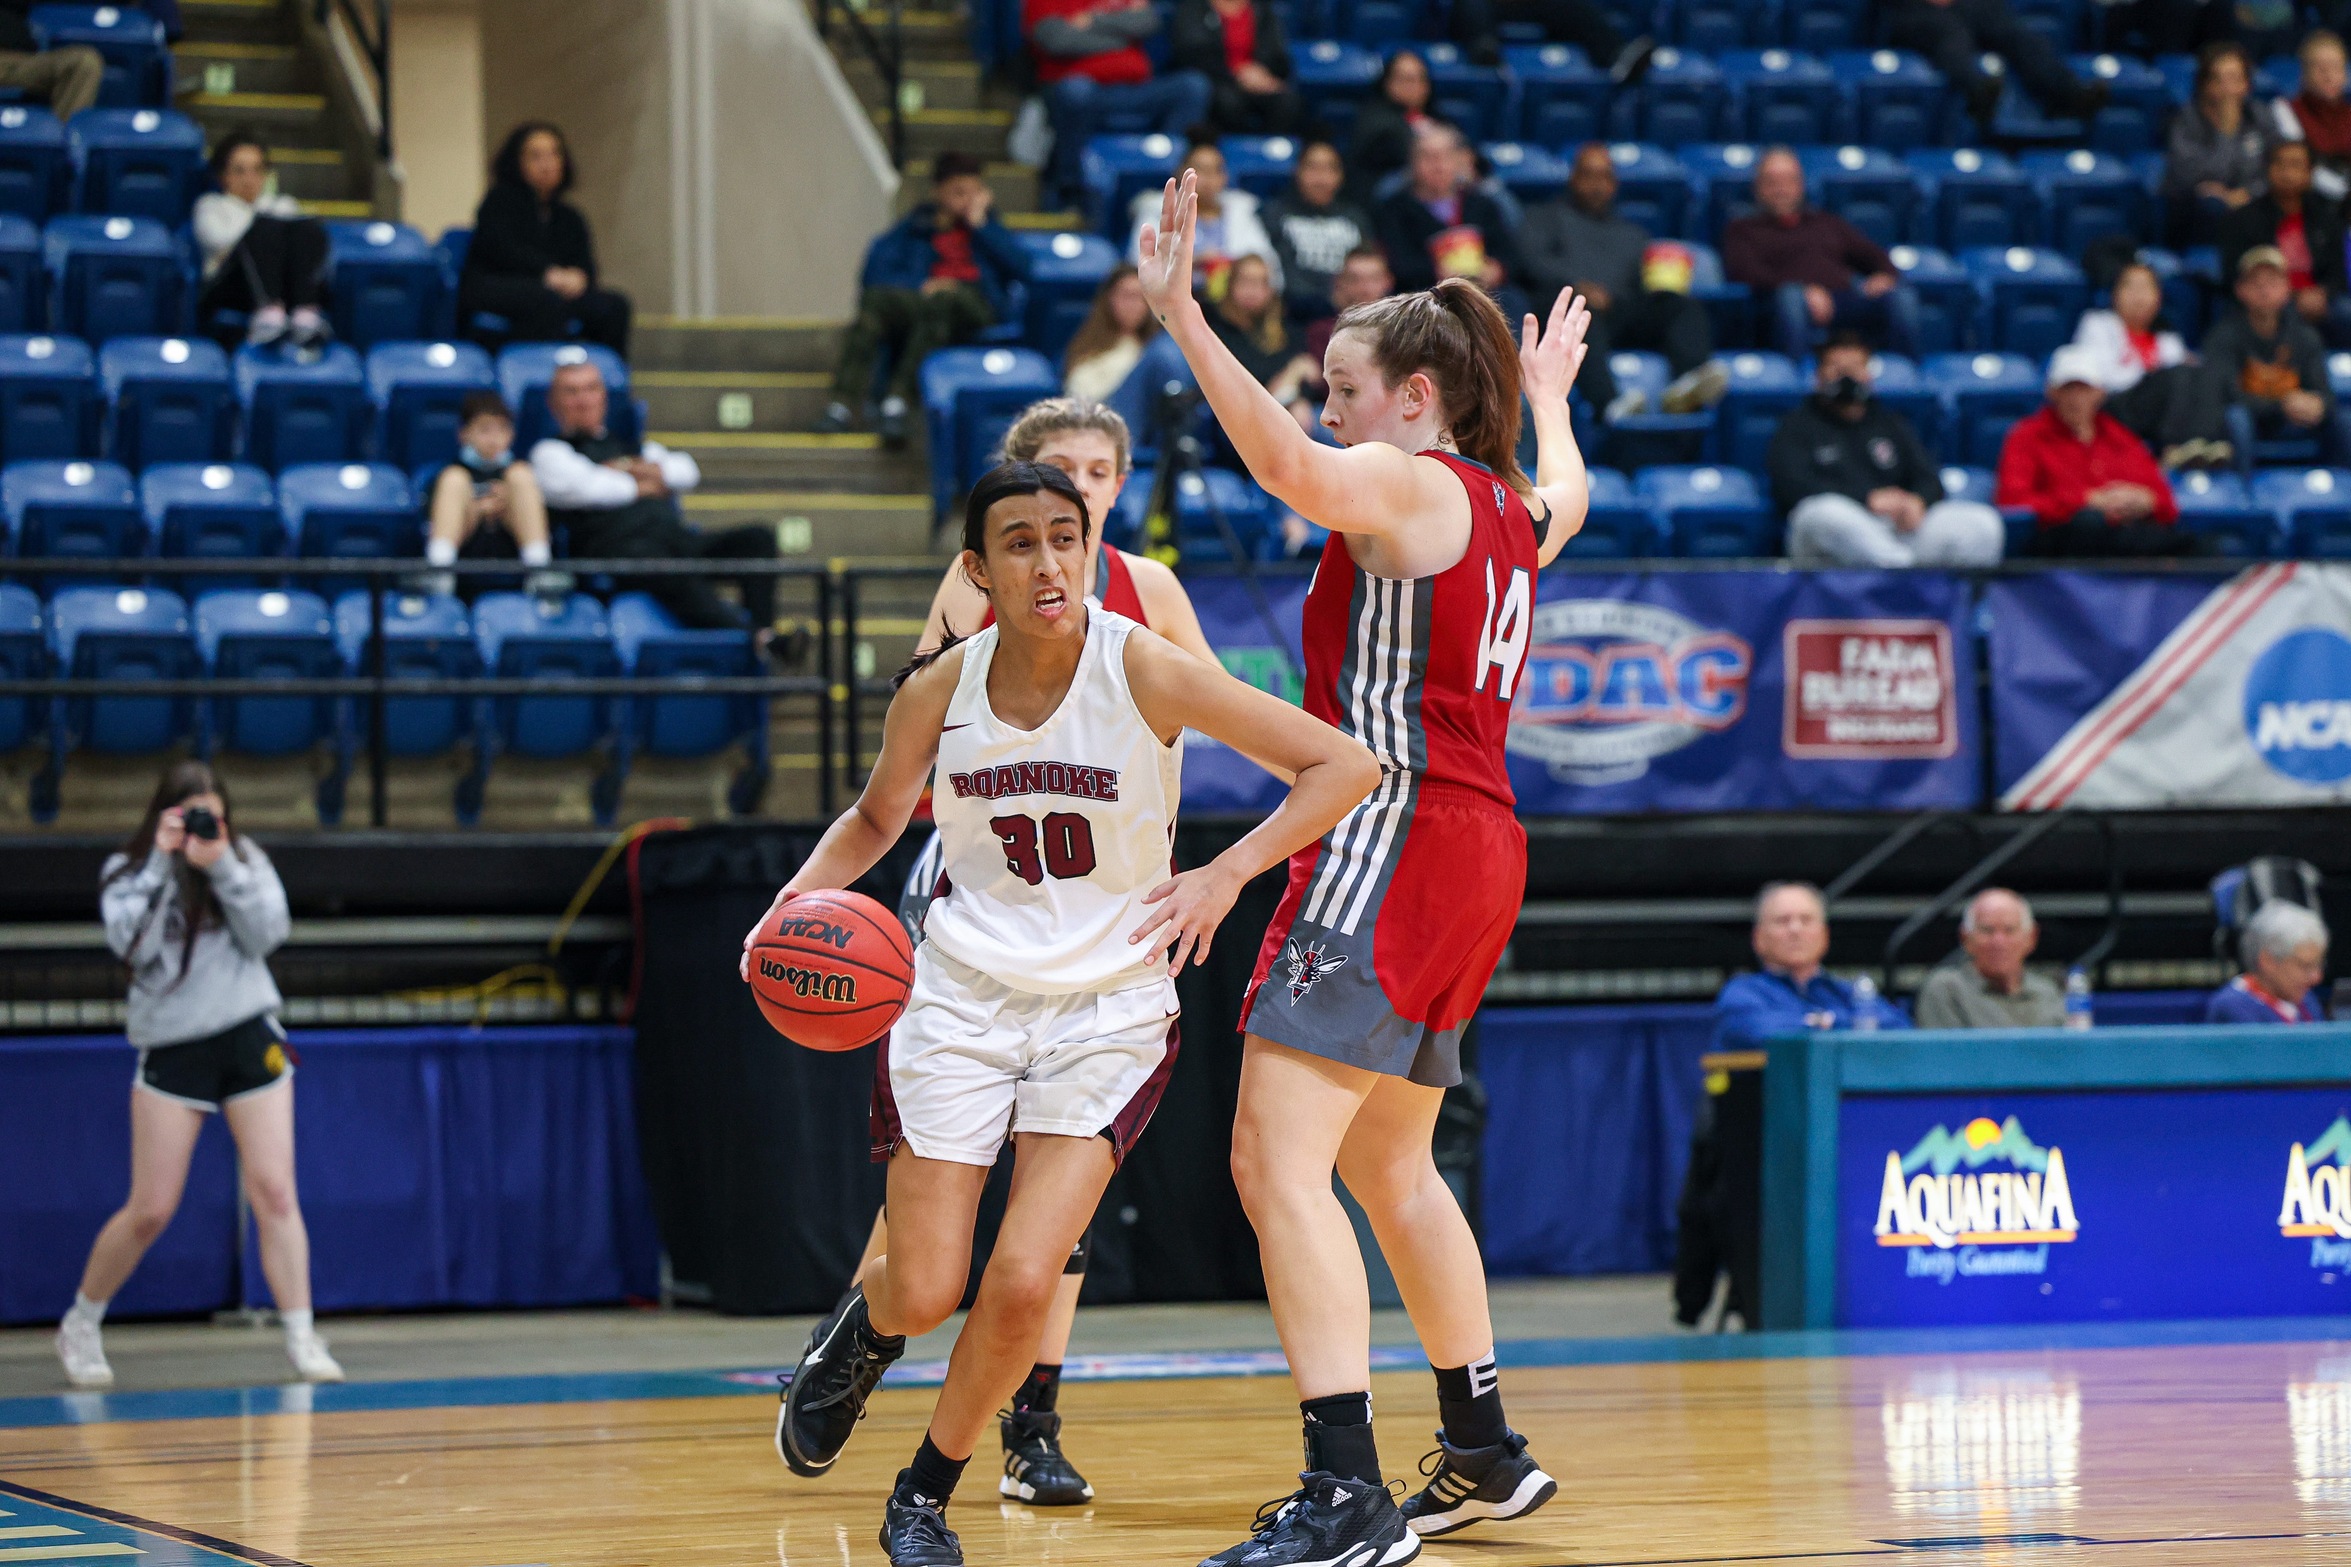 action photo of RC women's basketball player Renee Alquiza driving past a defender